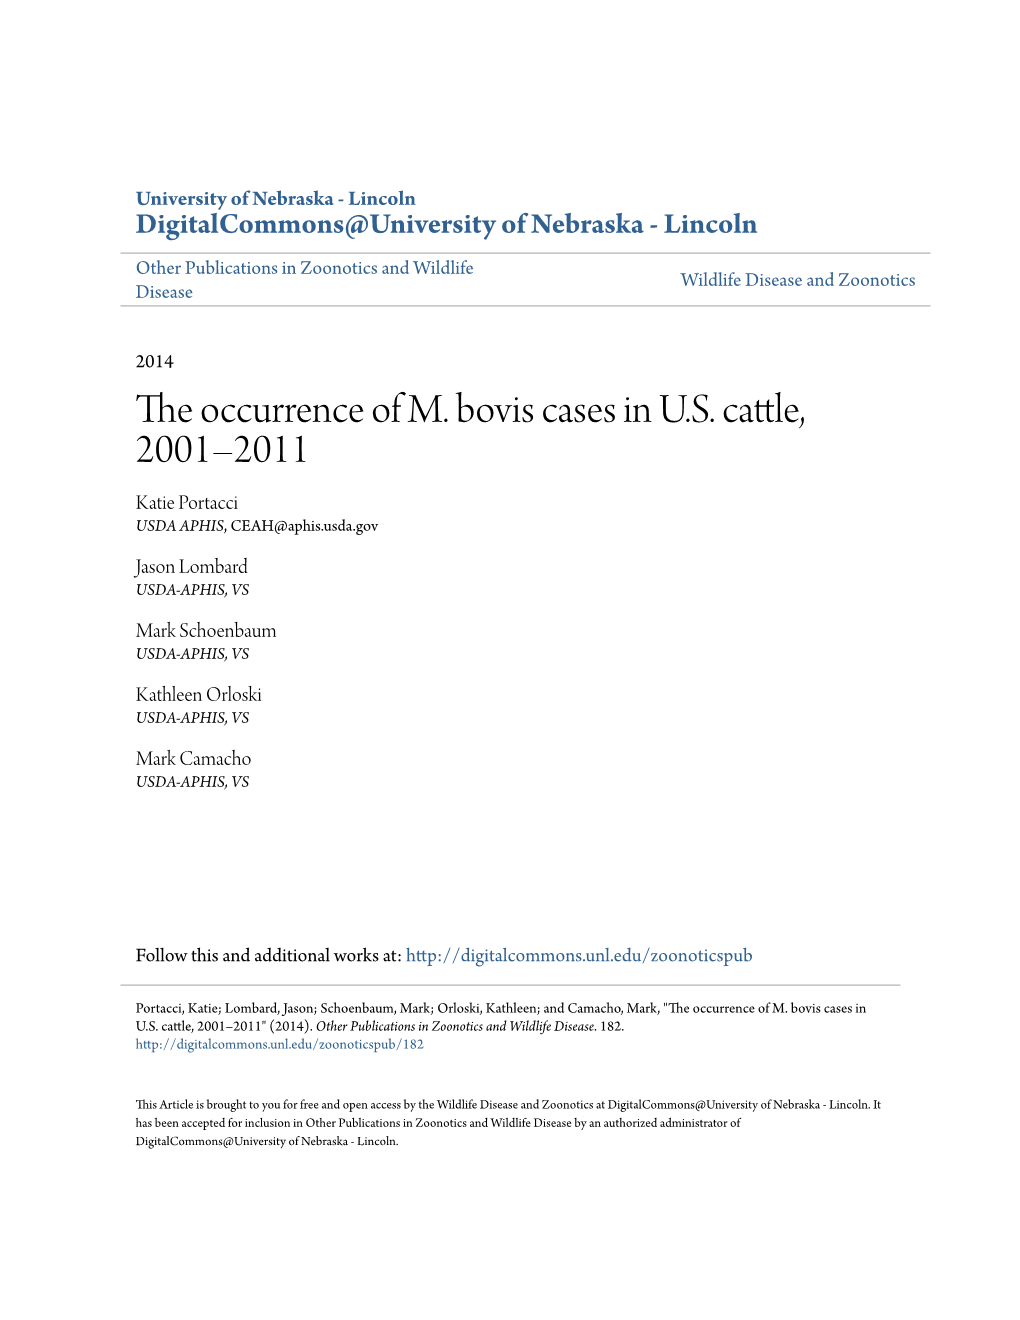 The Occurrence of M. Bovis Cases in US Cattle, 2001–2011